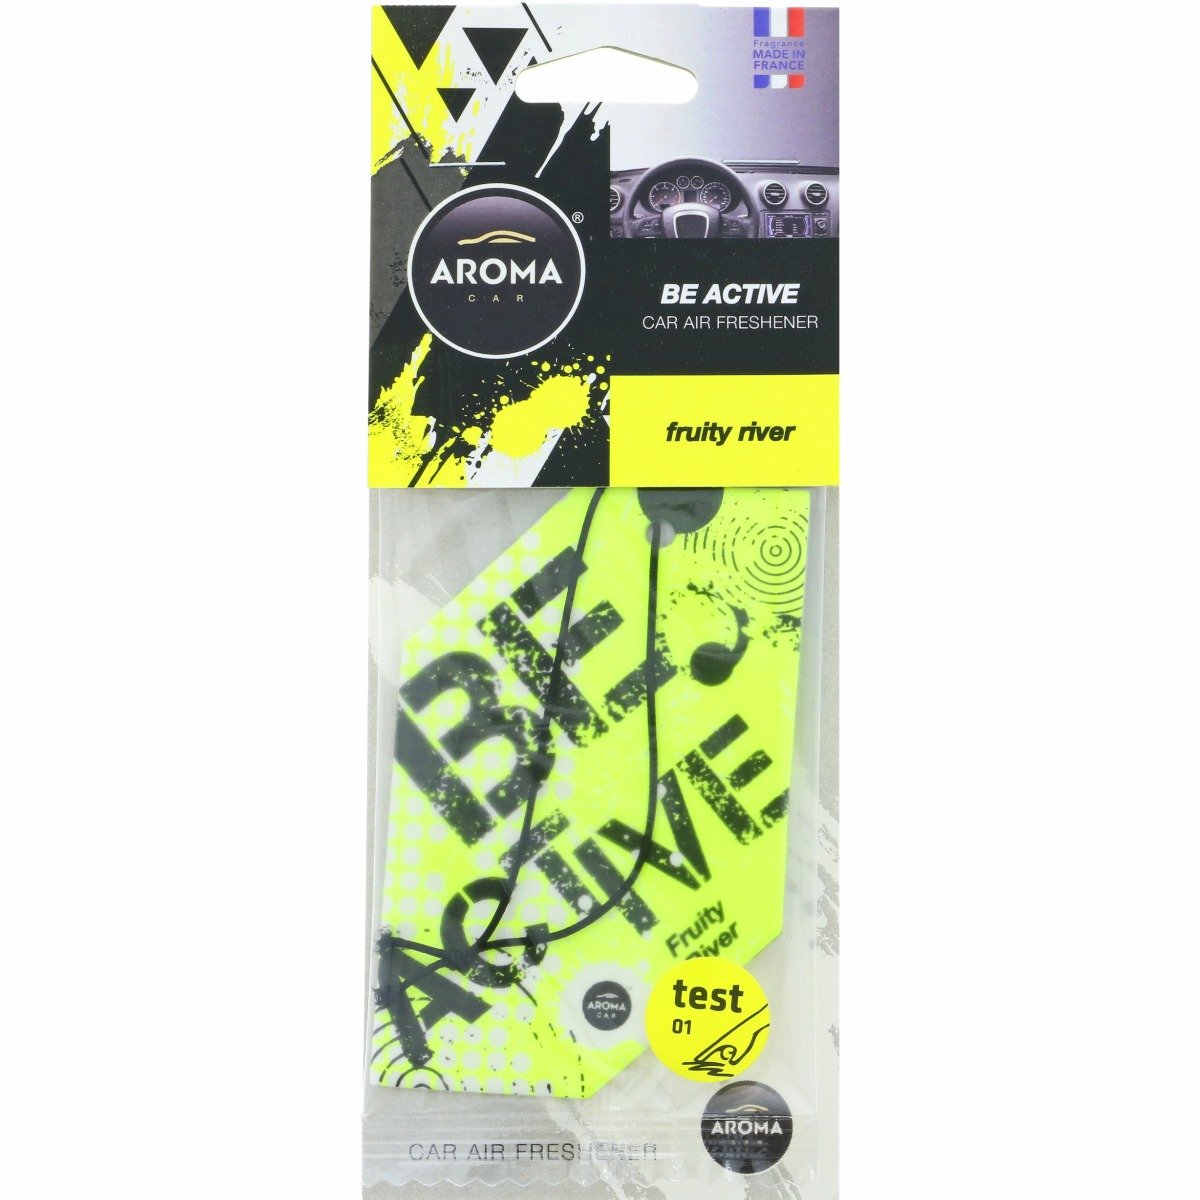 Be Active Car Air Freshener - Fruity River